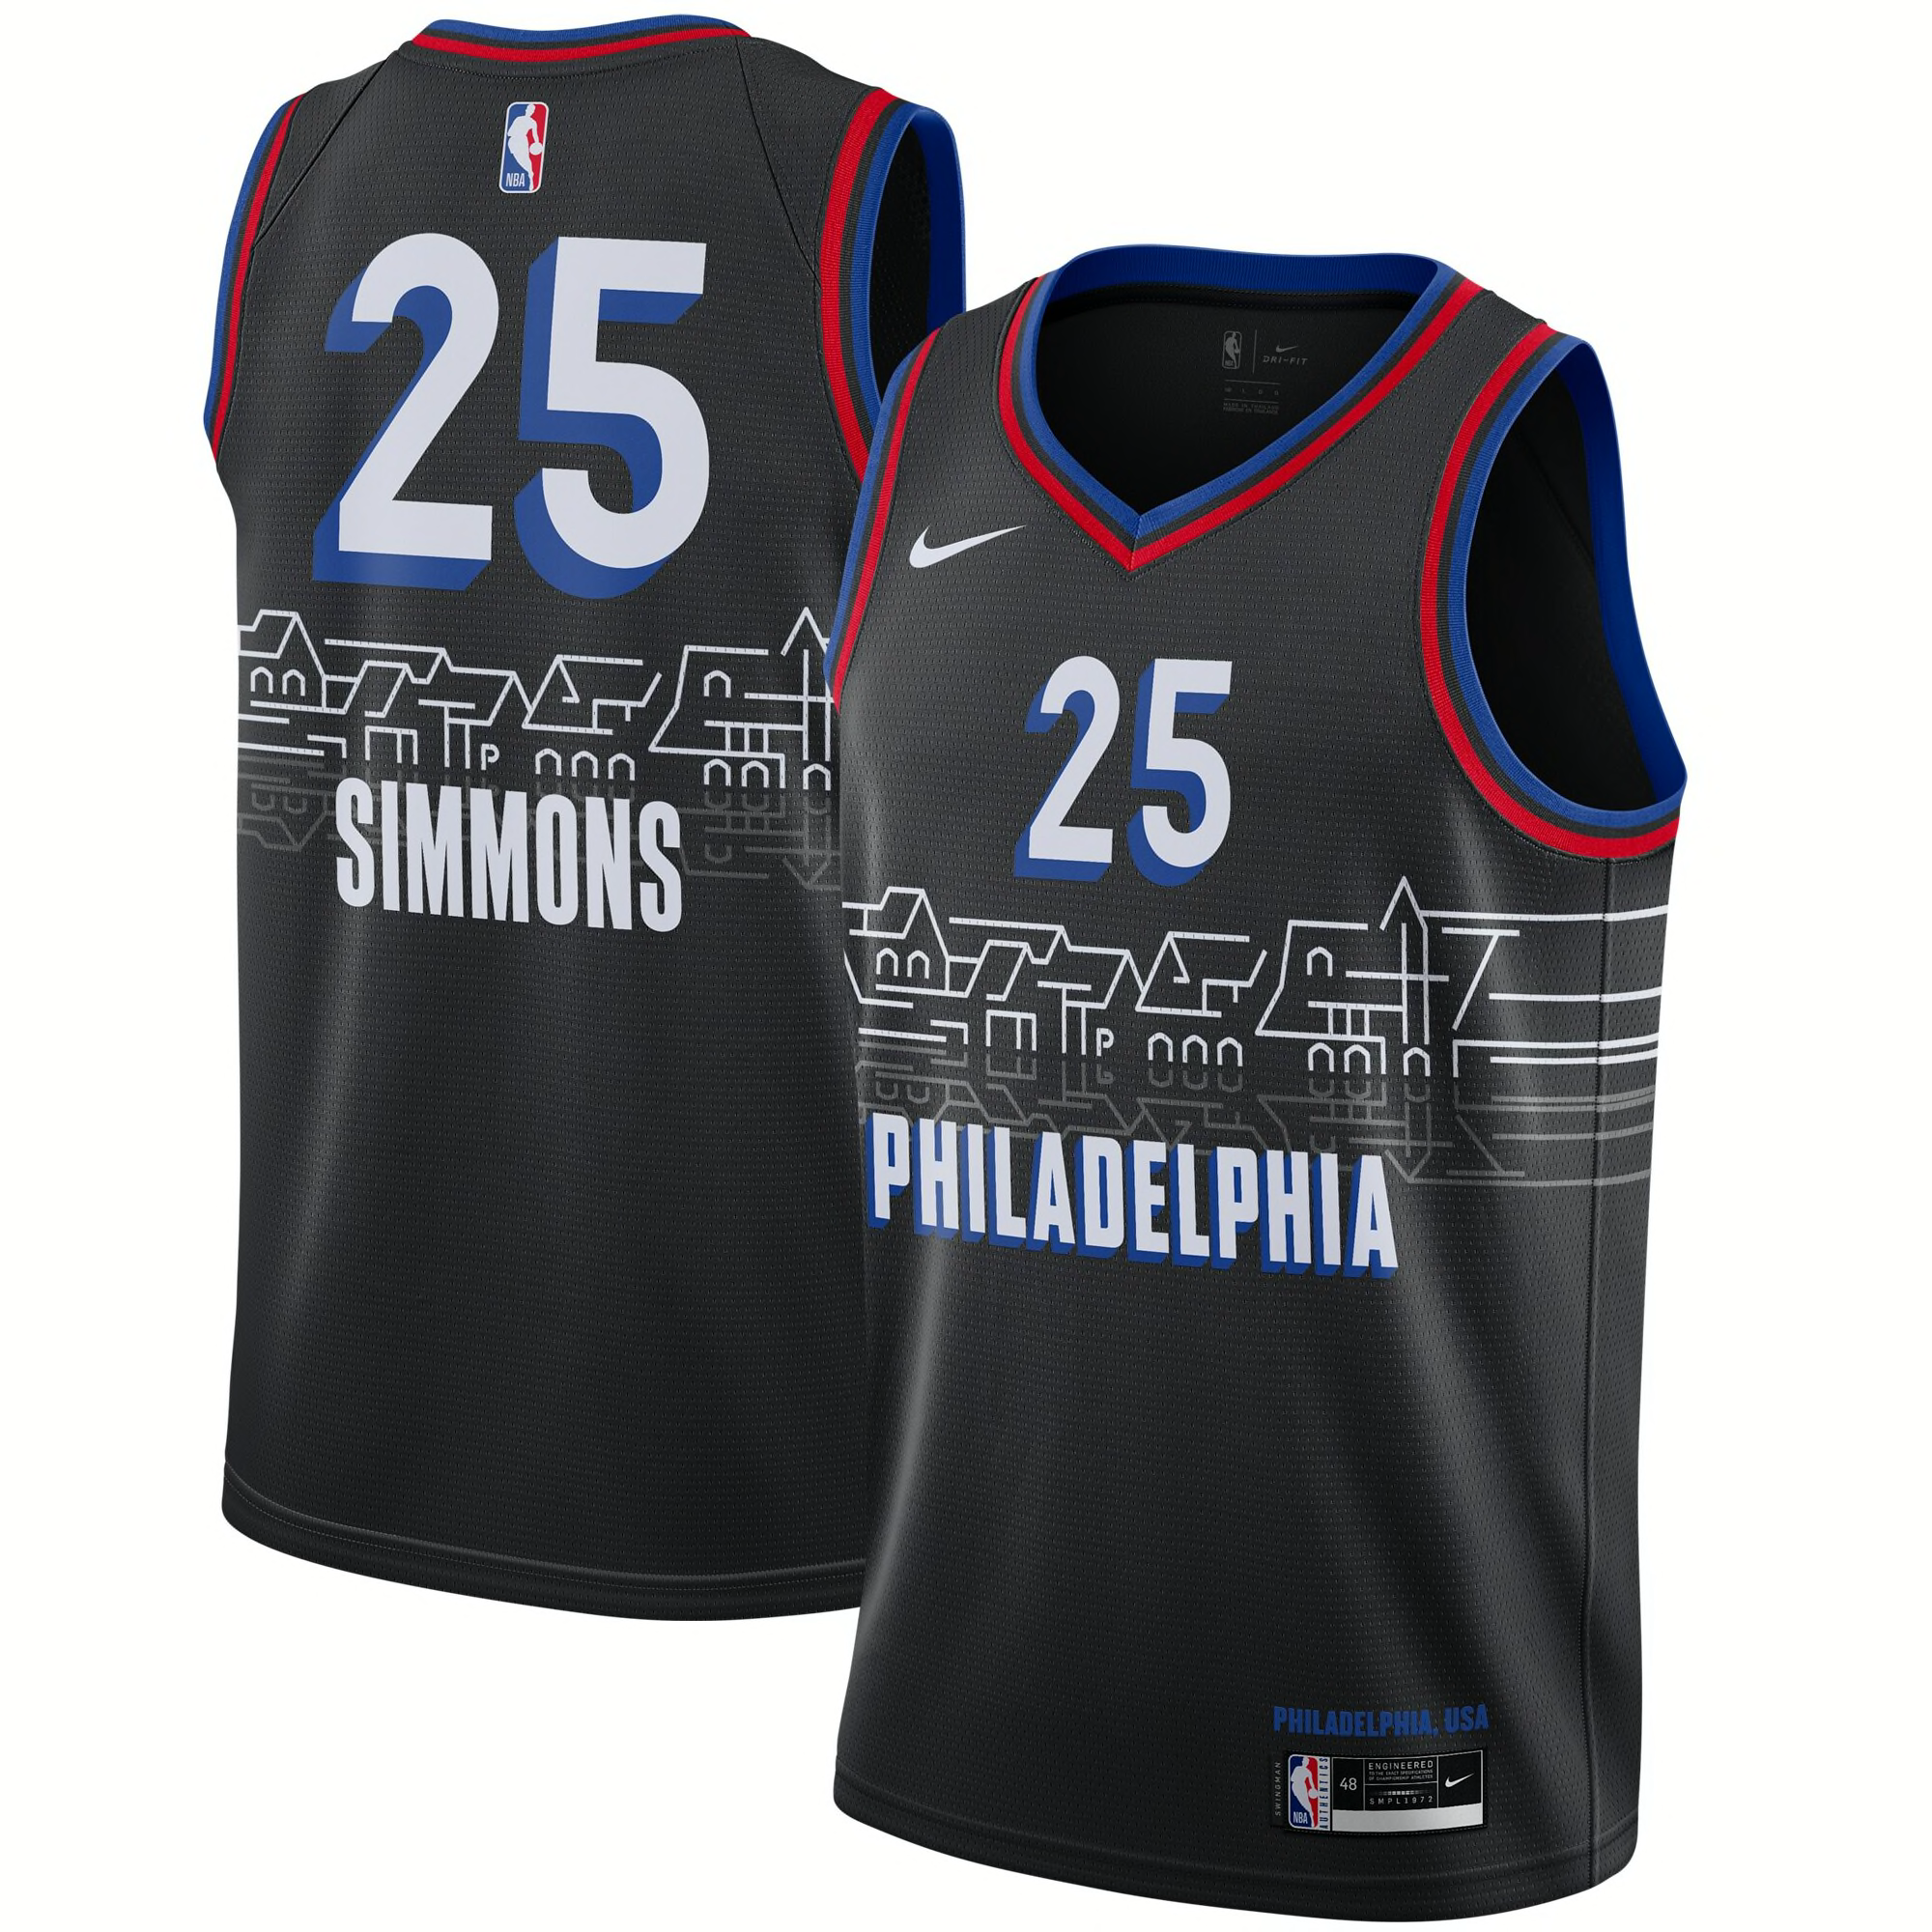 The perfect holiday gifts for the Philadelphia 76ers fan